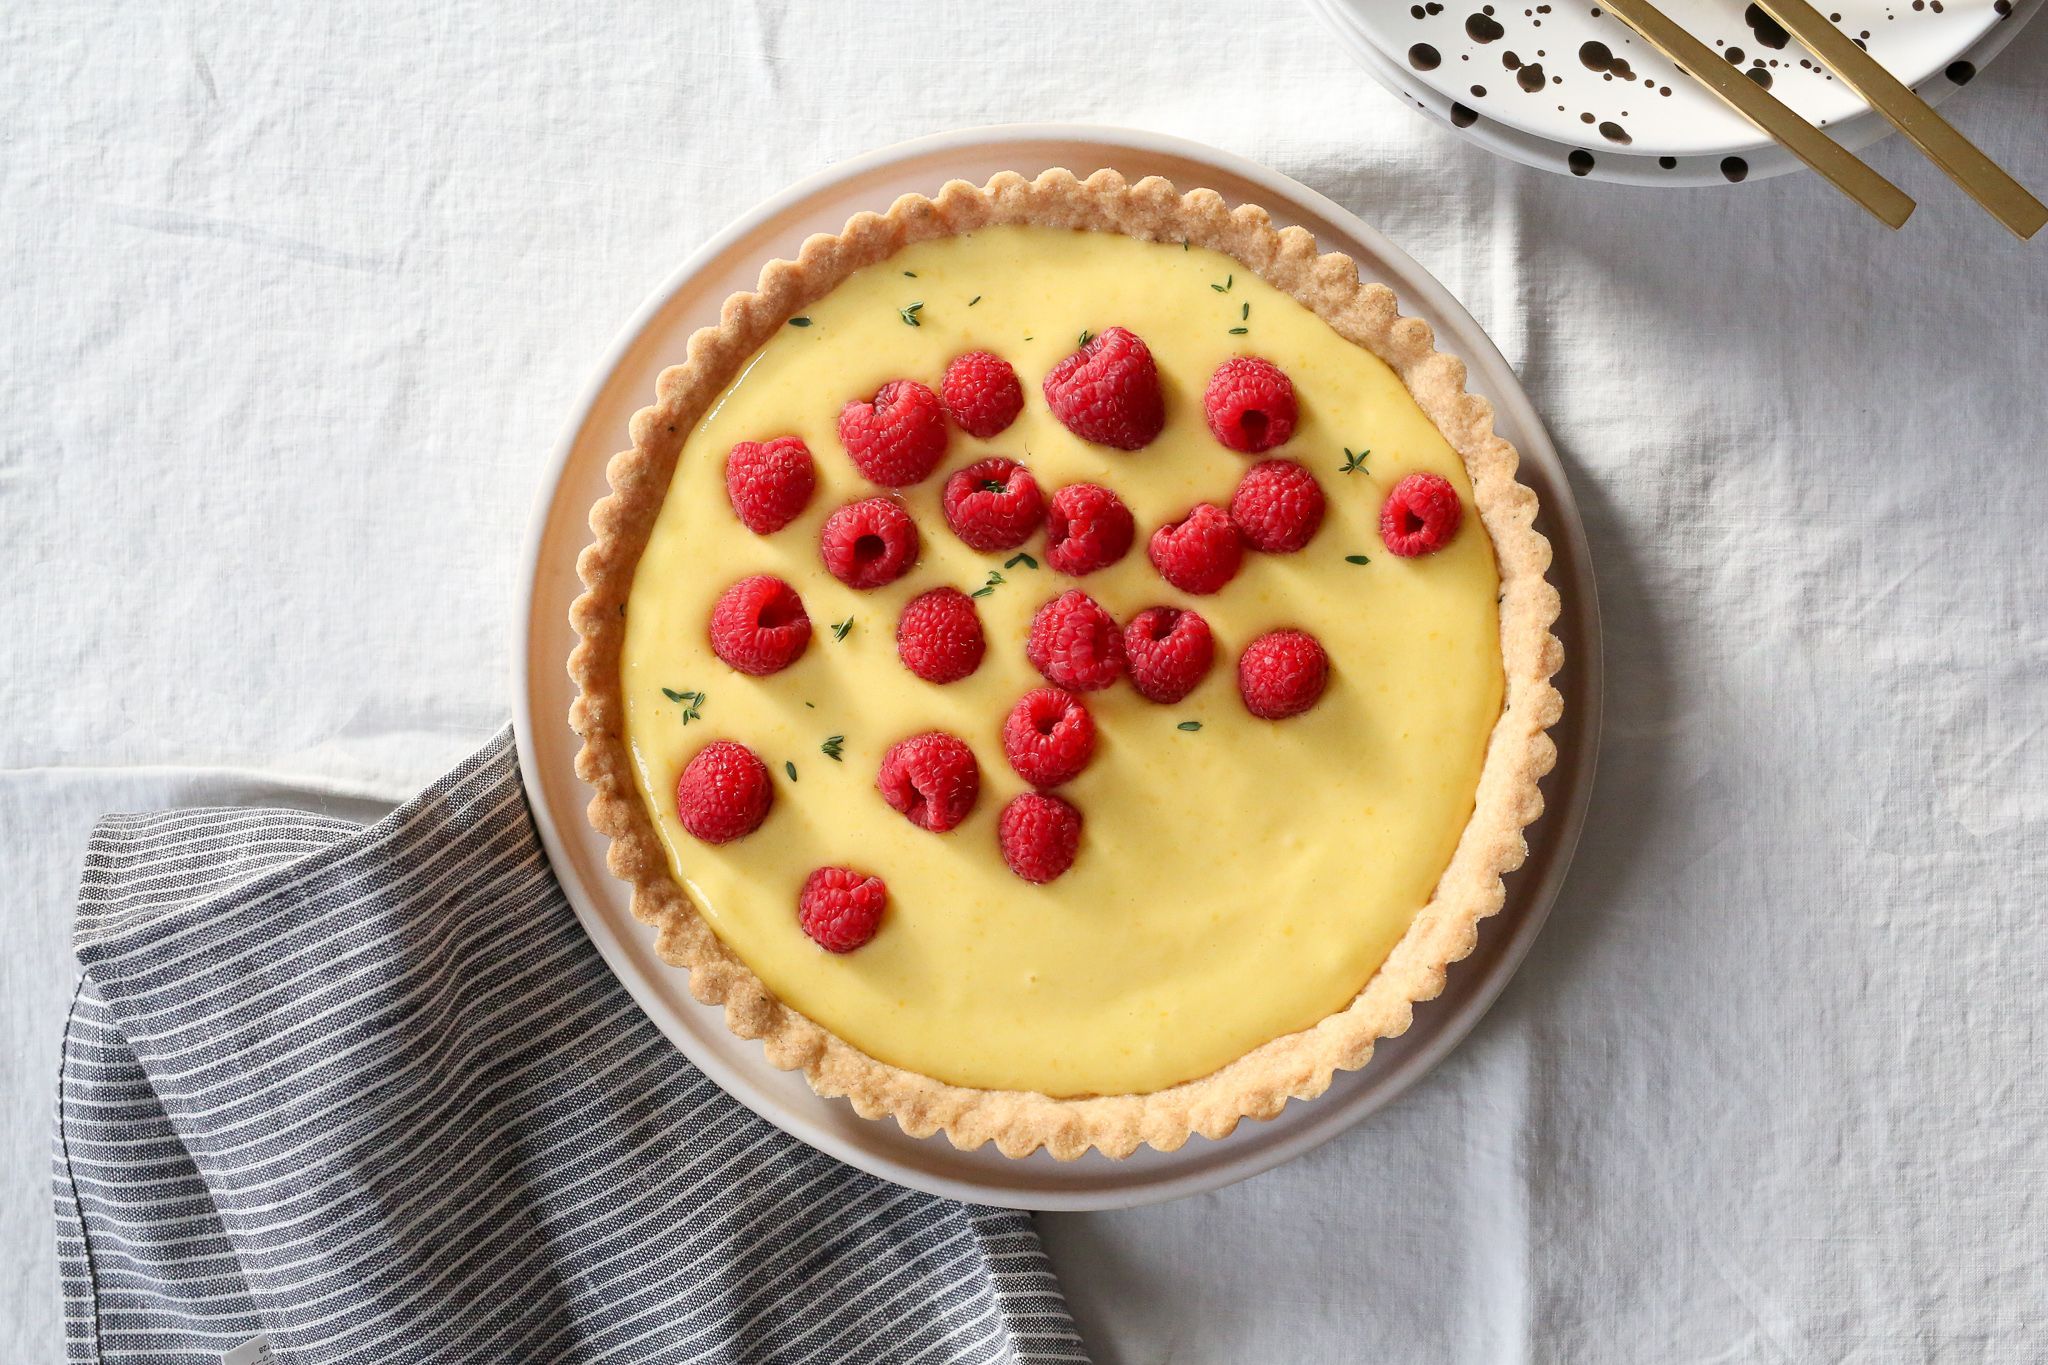 lemon and raspberry tart with grey napkin and brown speckled plate